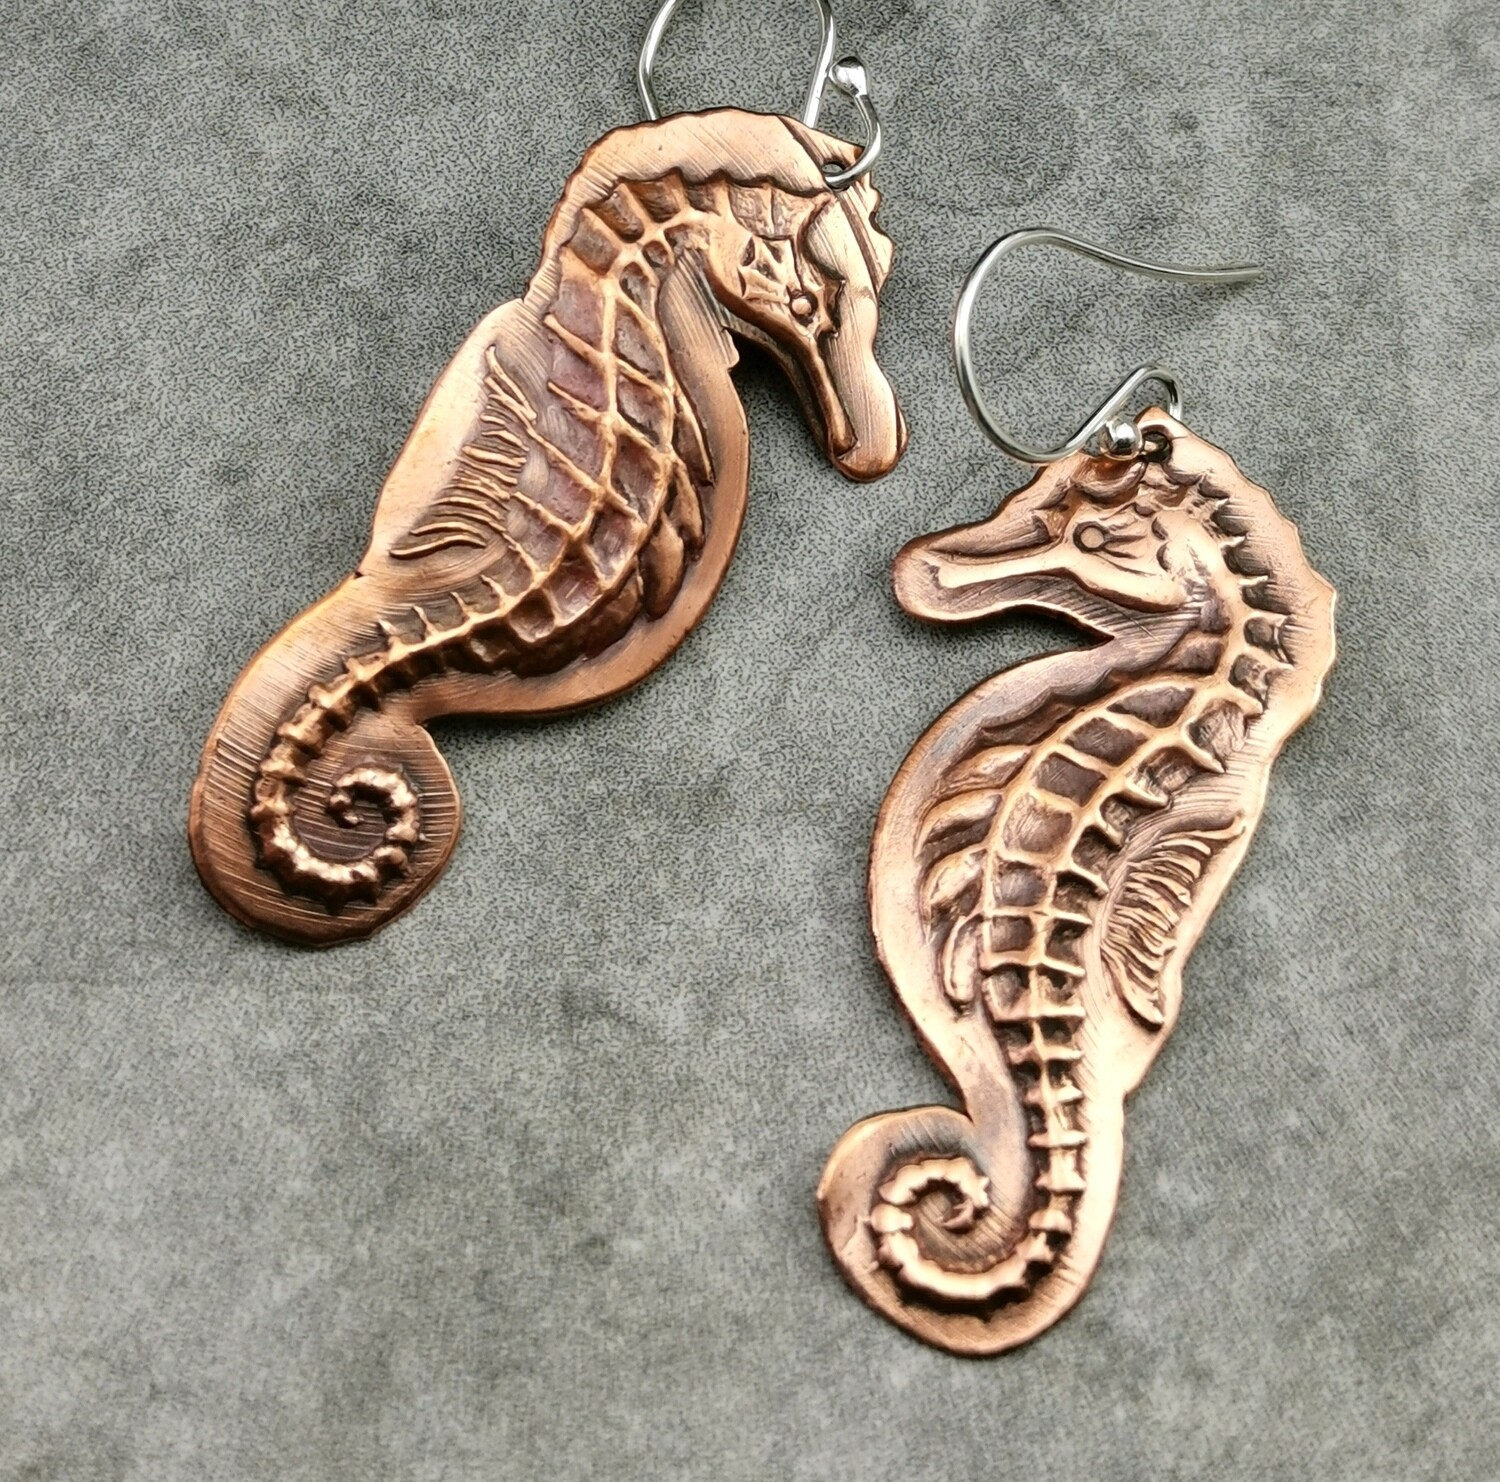 Seahorse Jewelry, Seahorse Earrings, Beach Jewelry, Gifts for Her, Copper Jewelry, Seahorse, Ocean, Water Element, Strength